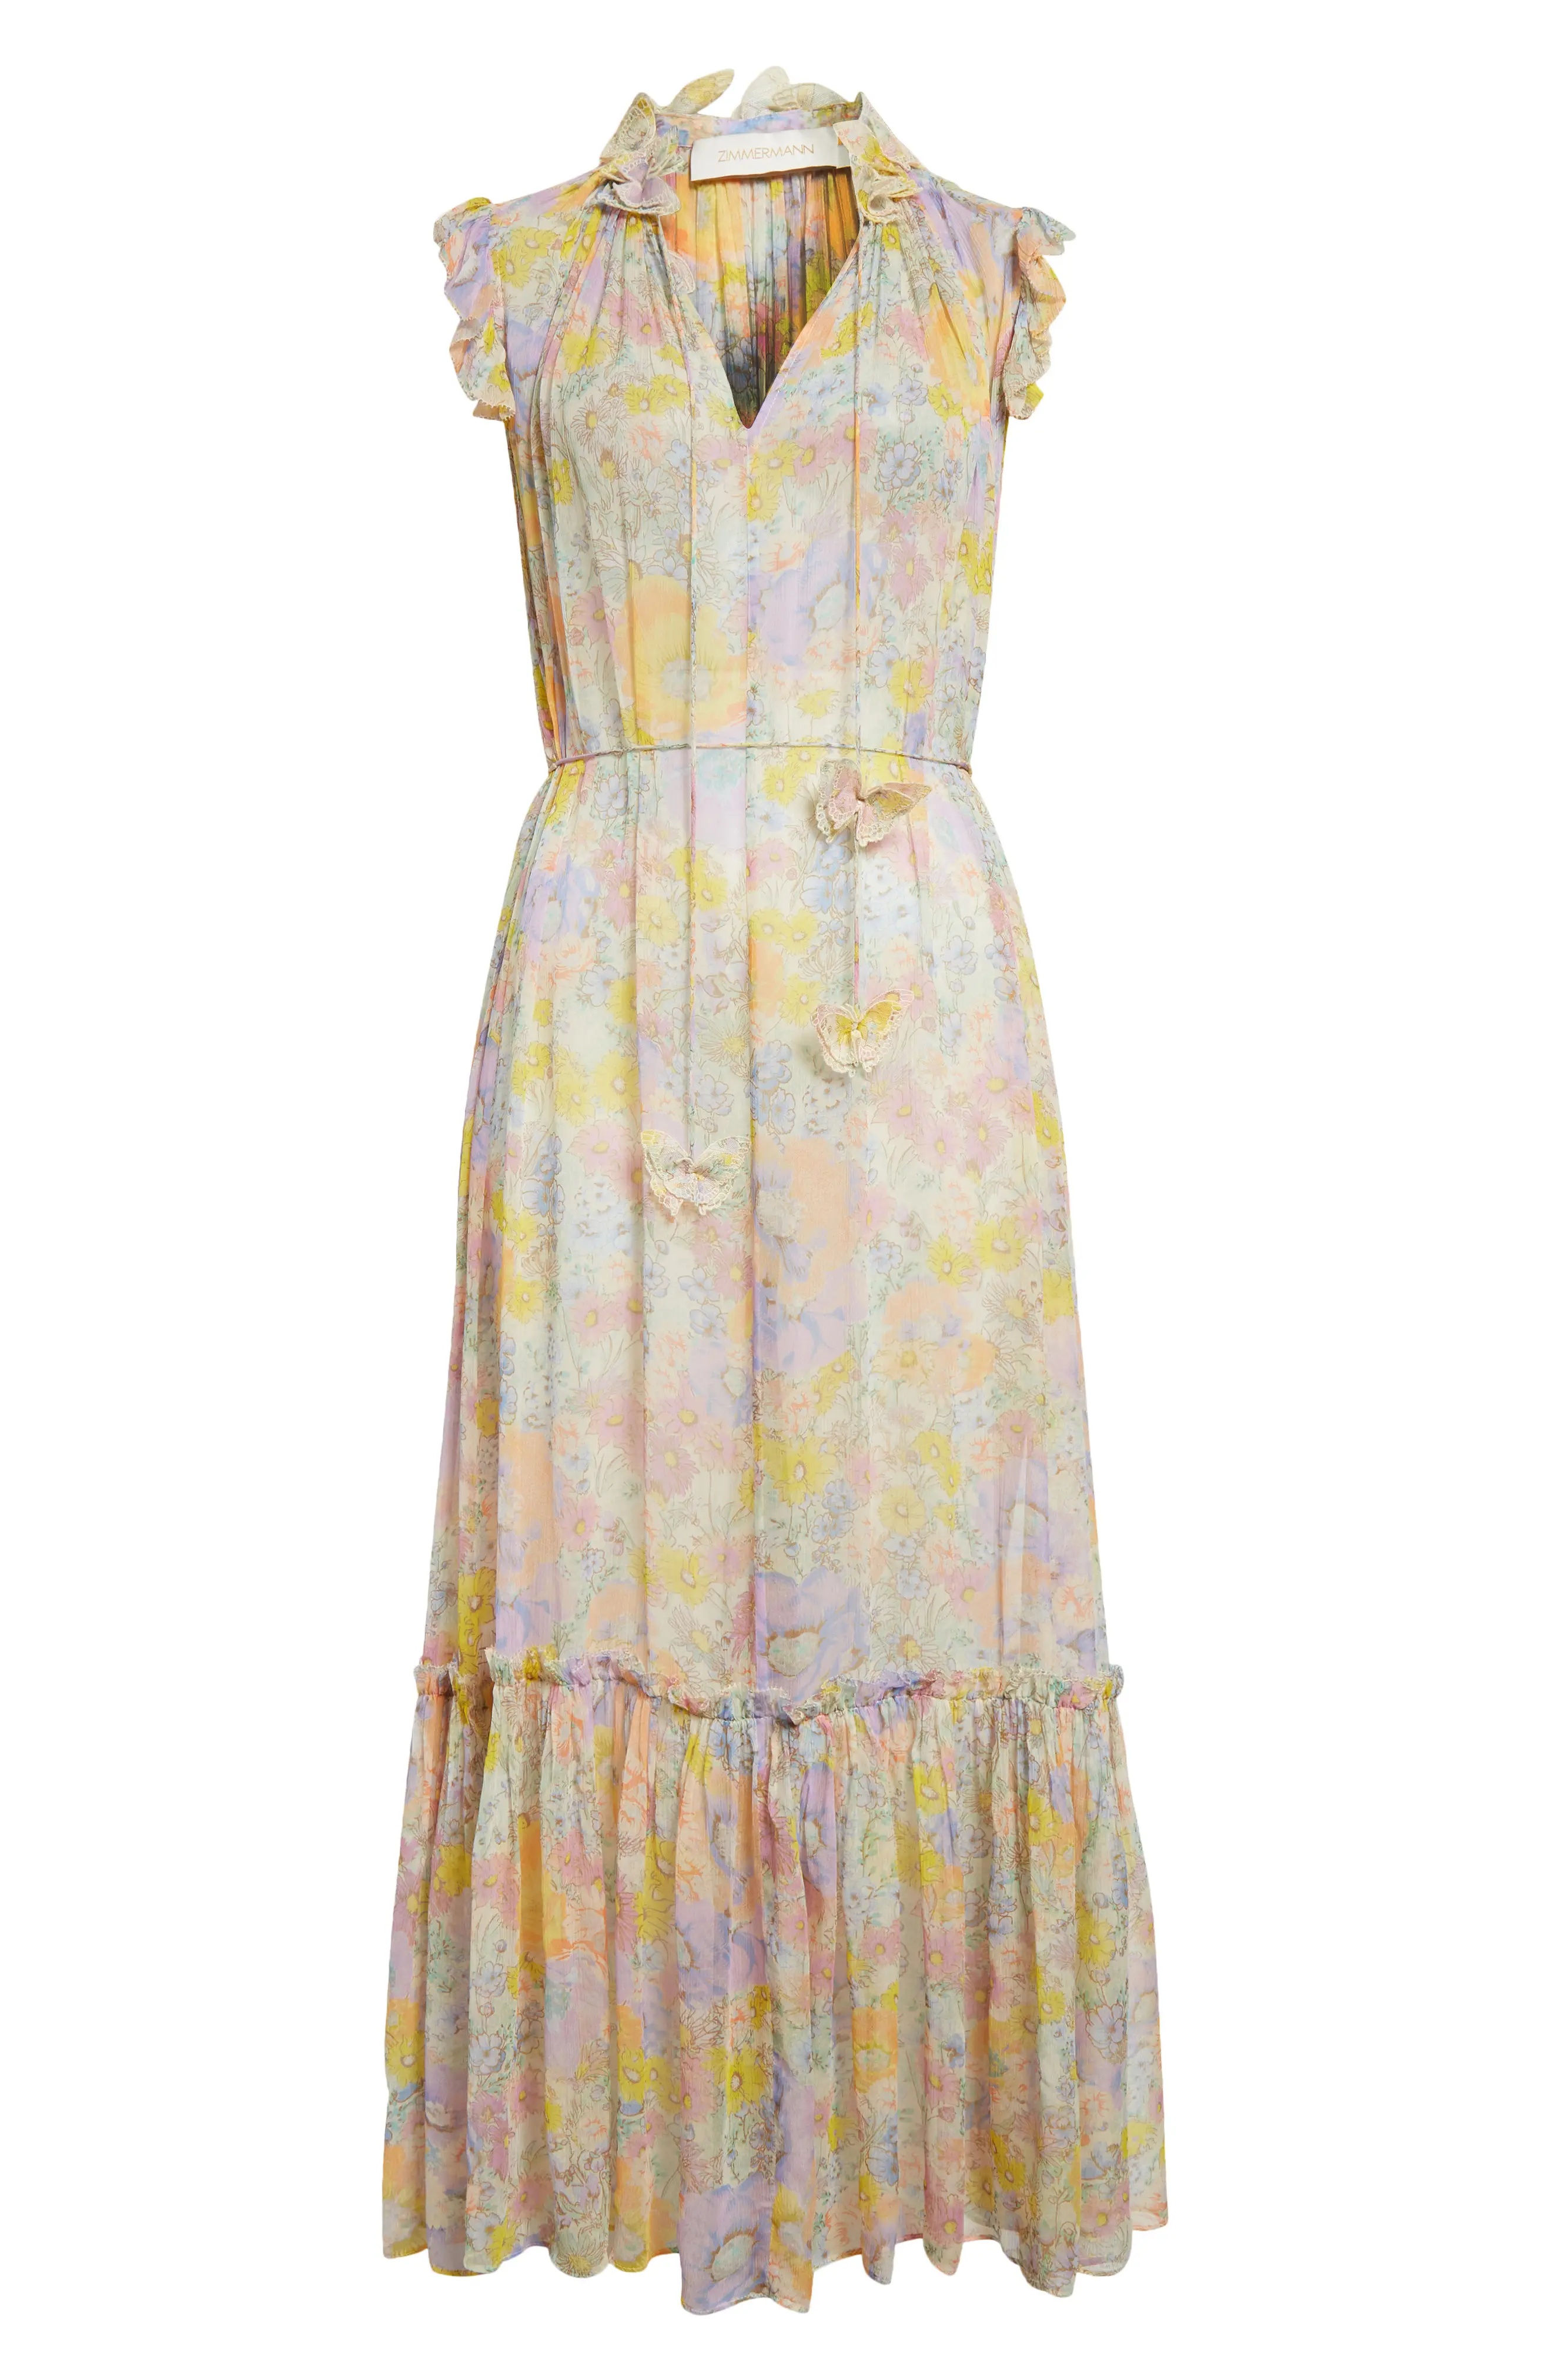 Butterfly Floral Print Tiered Dress - 5